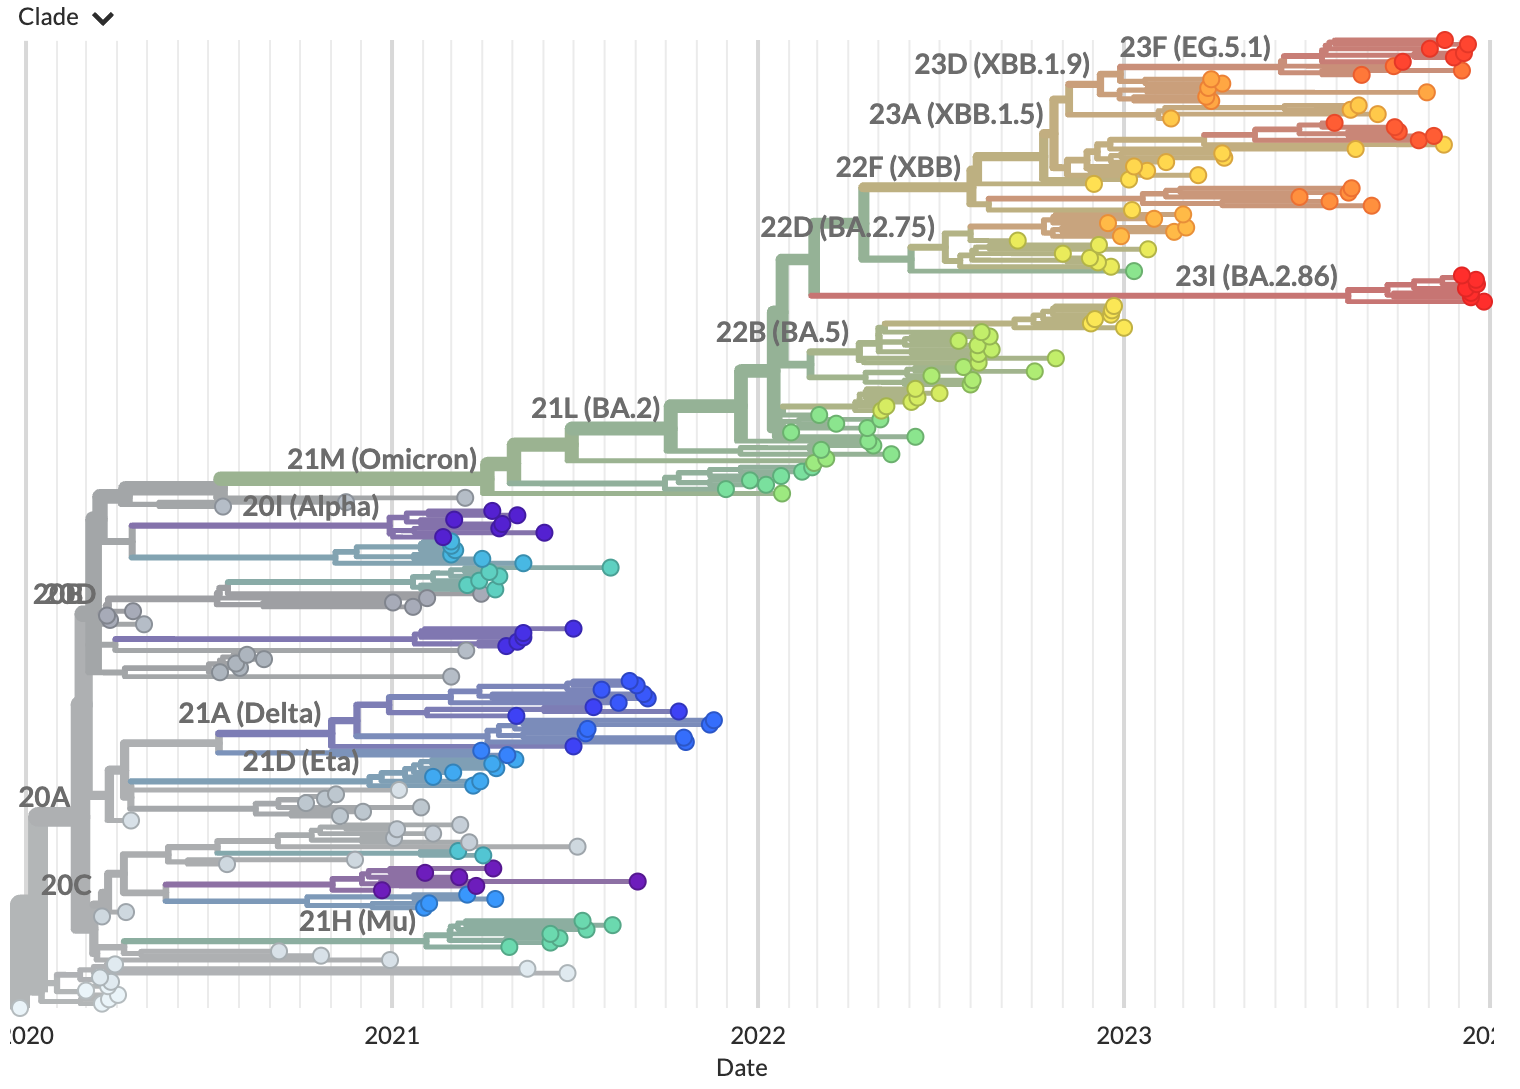 Phylogenetic tree from the "example data" tutorial as visualized in Auspice